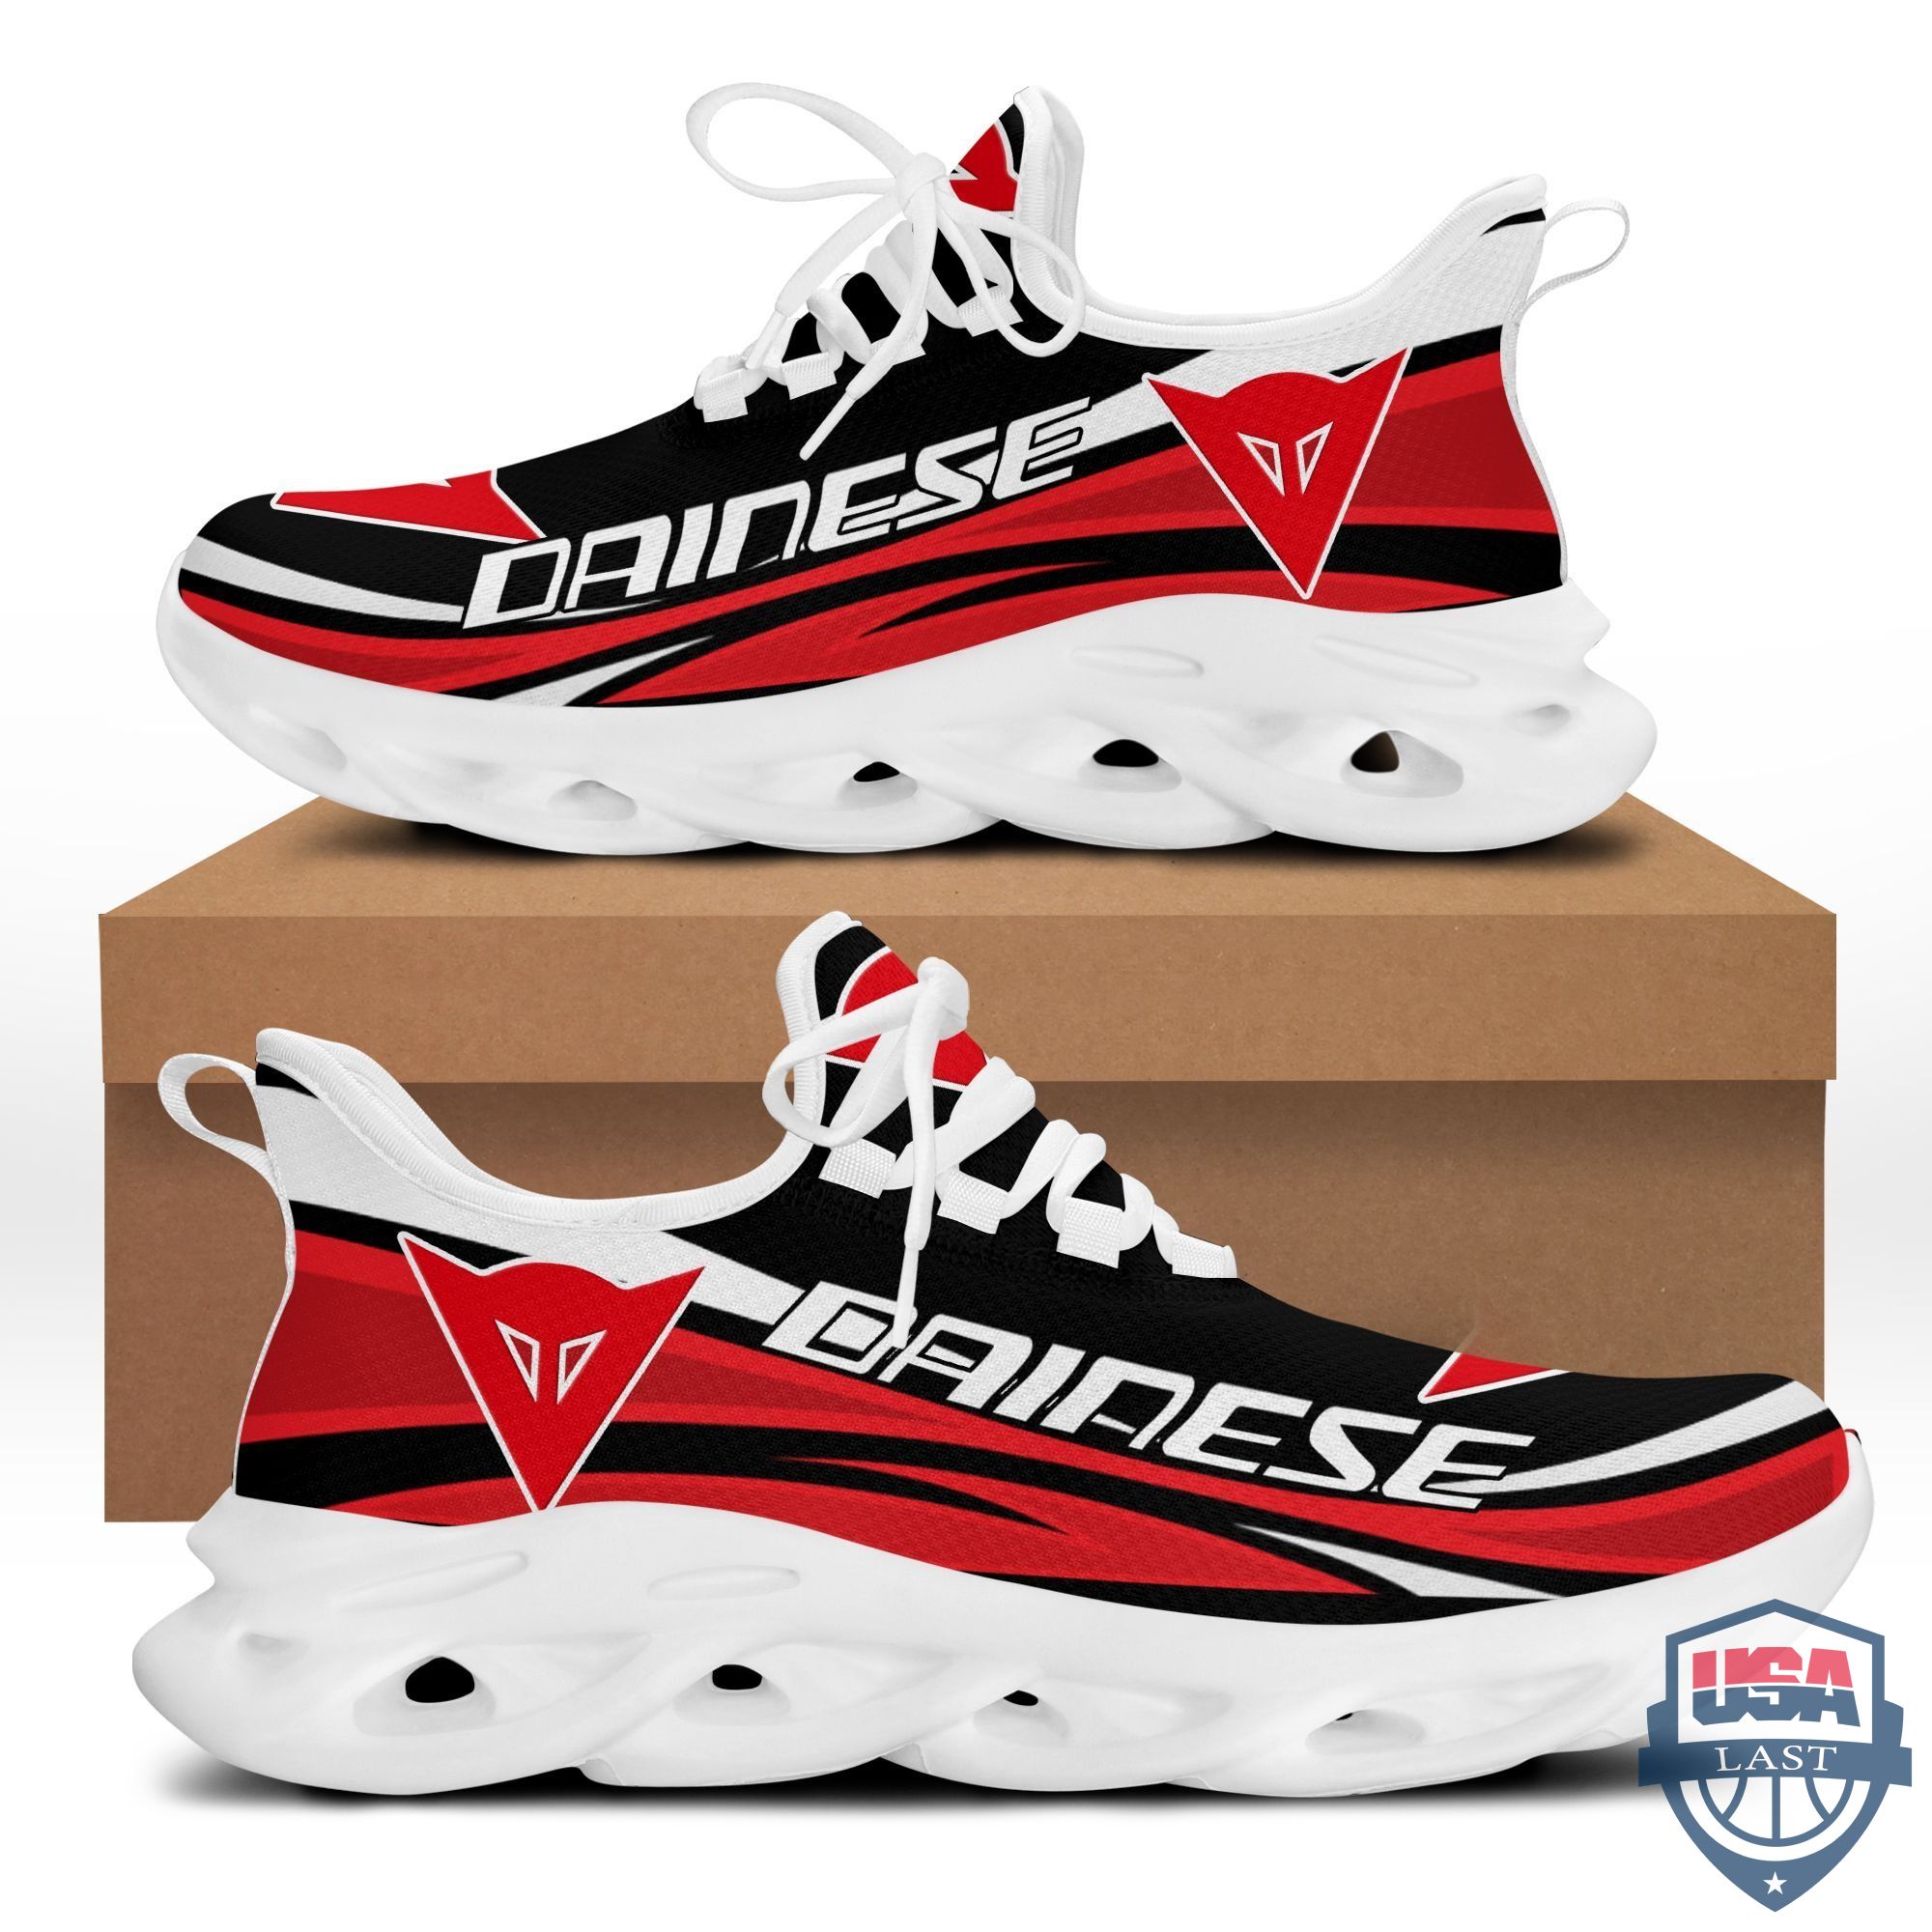 Dainese Sport Sneaker Running Shoes Red Version